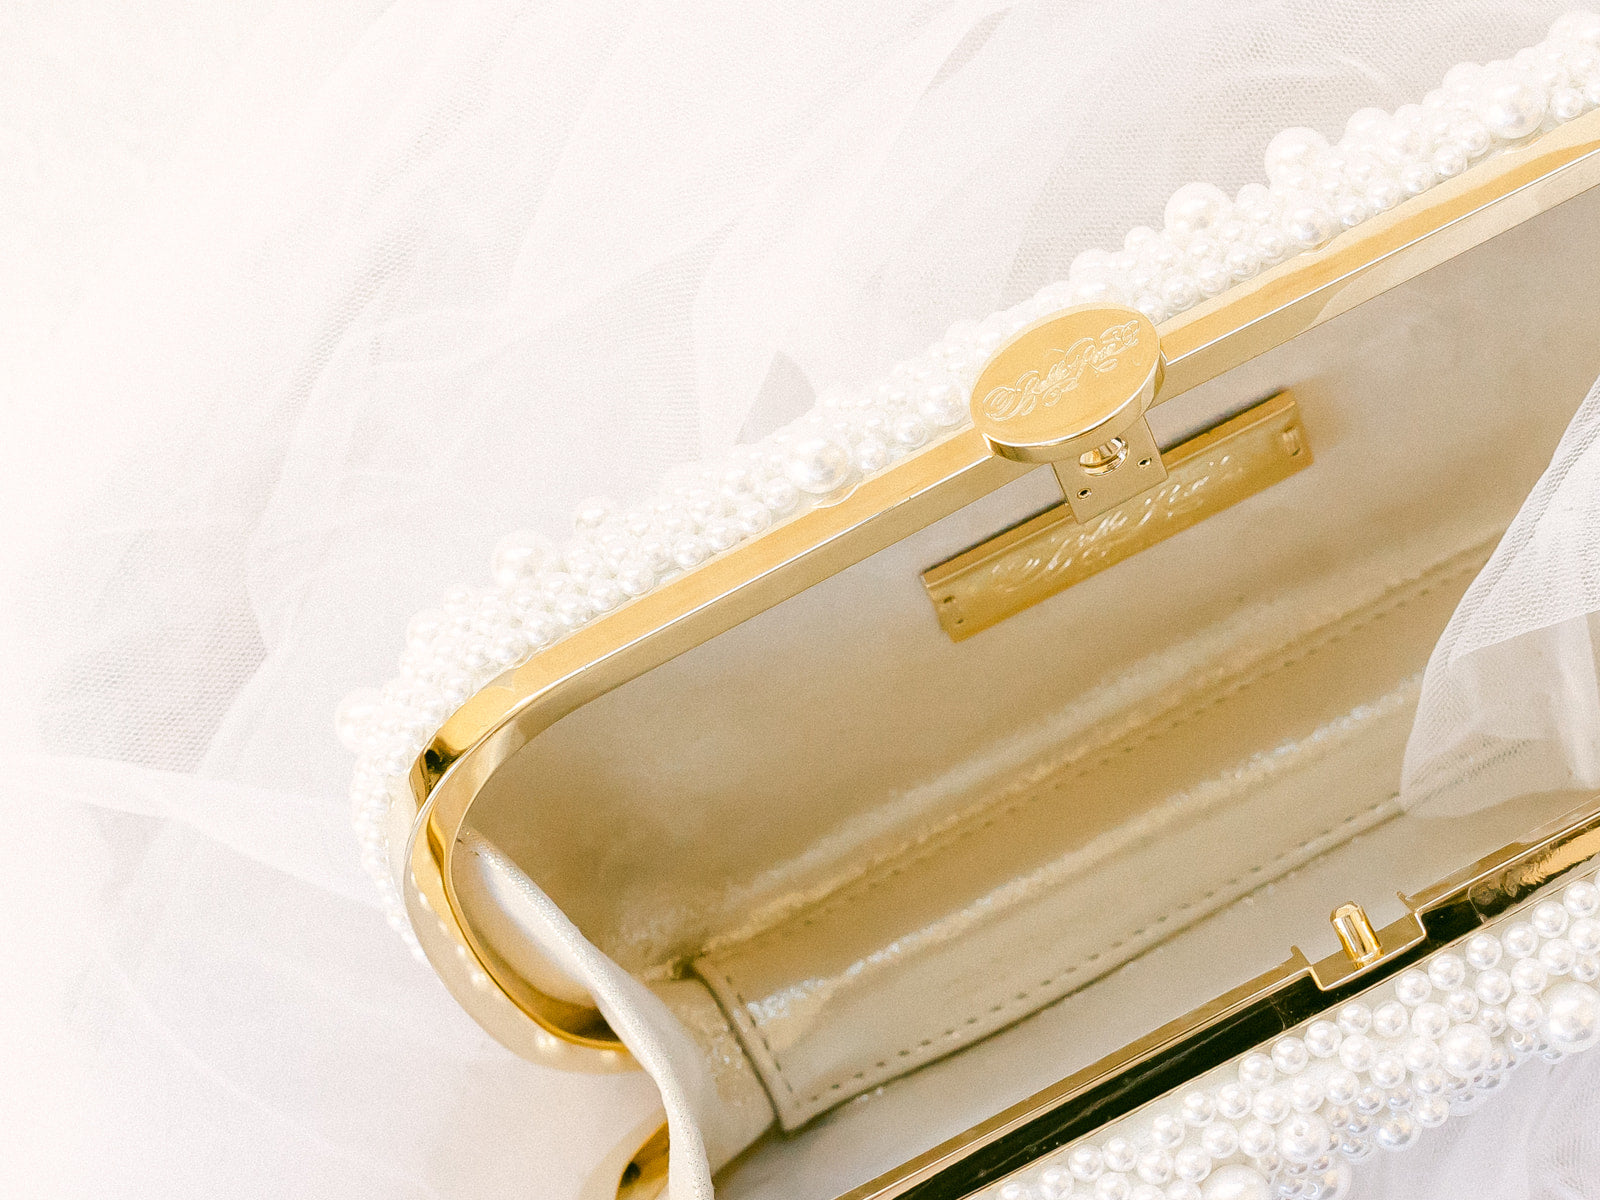 An elegant True Love Pearl Petite Bella Clutch from The Bella Rosa Collection, adorned with pearls, partially obscured by a translucent white fabric.